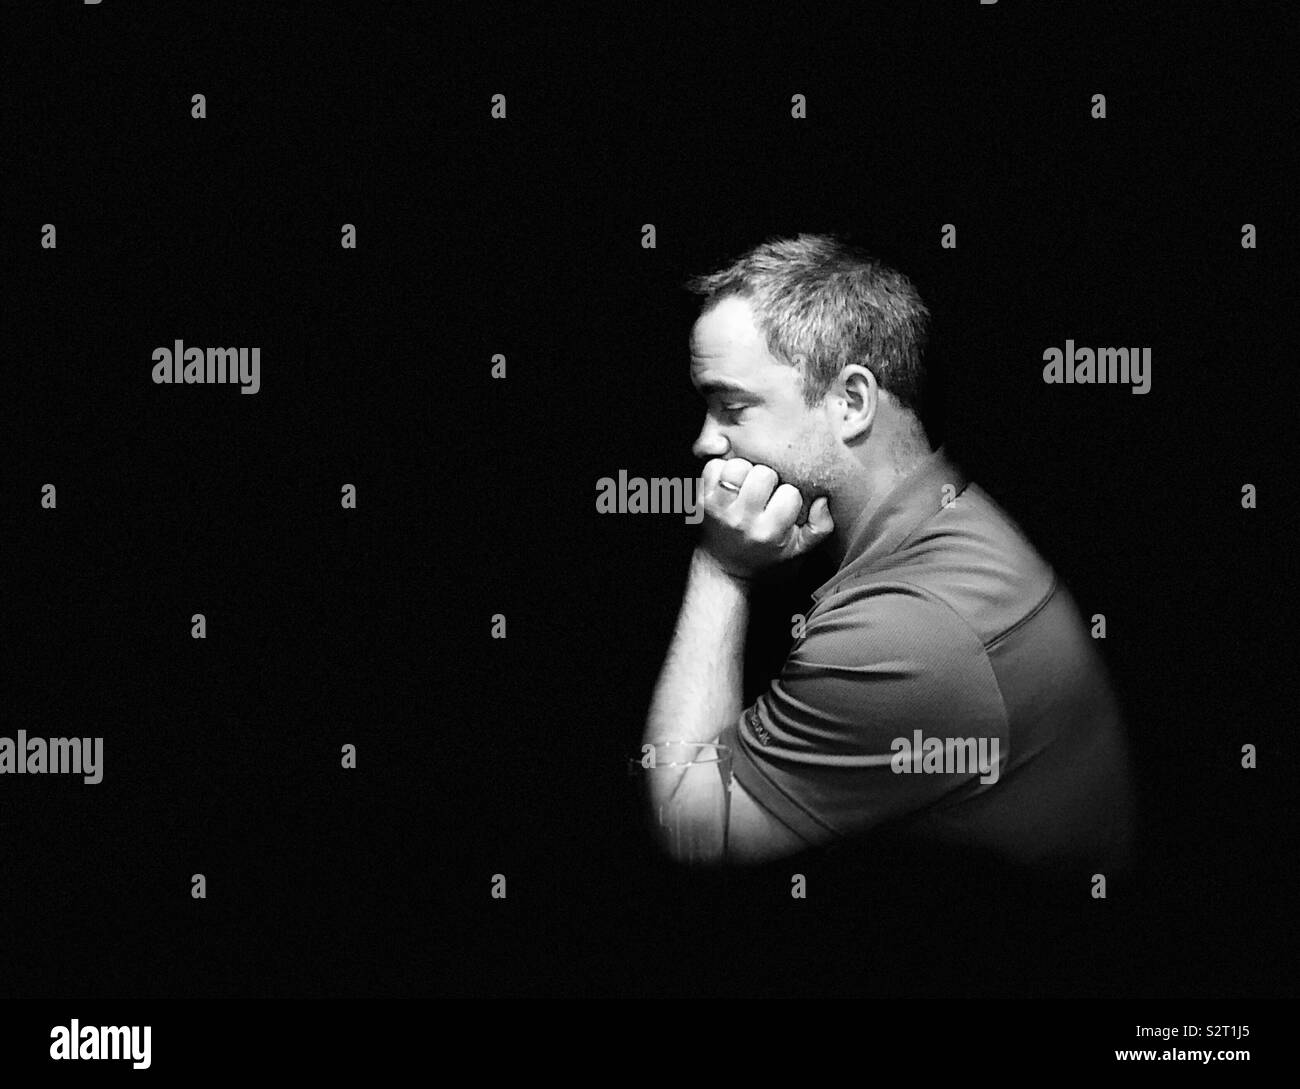 Man thinking with face resting on hand in darkness Stock Photo